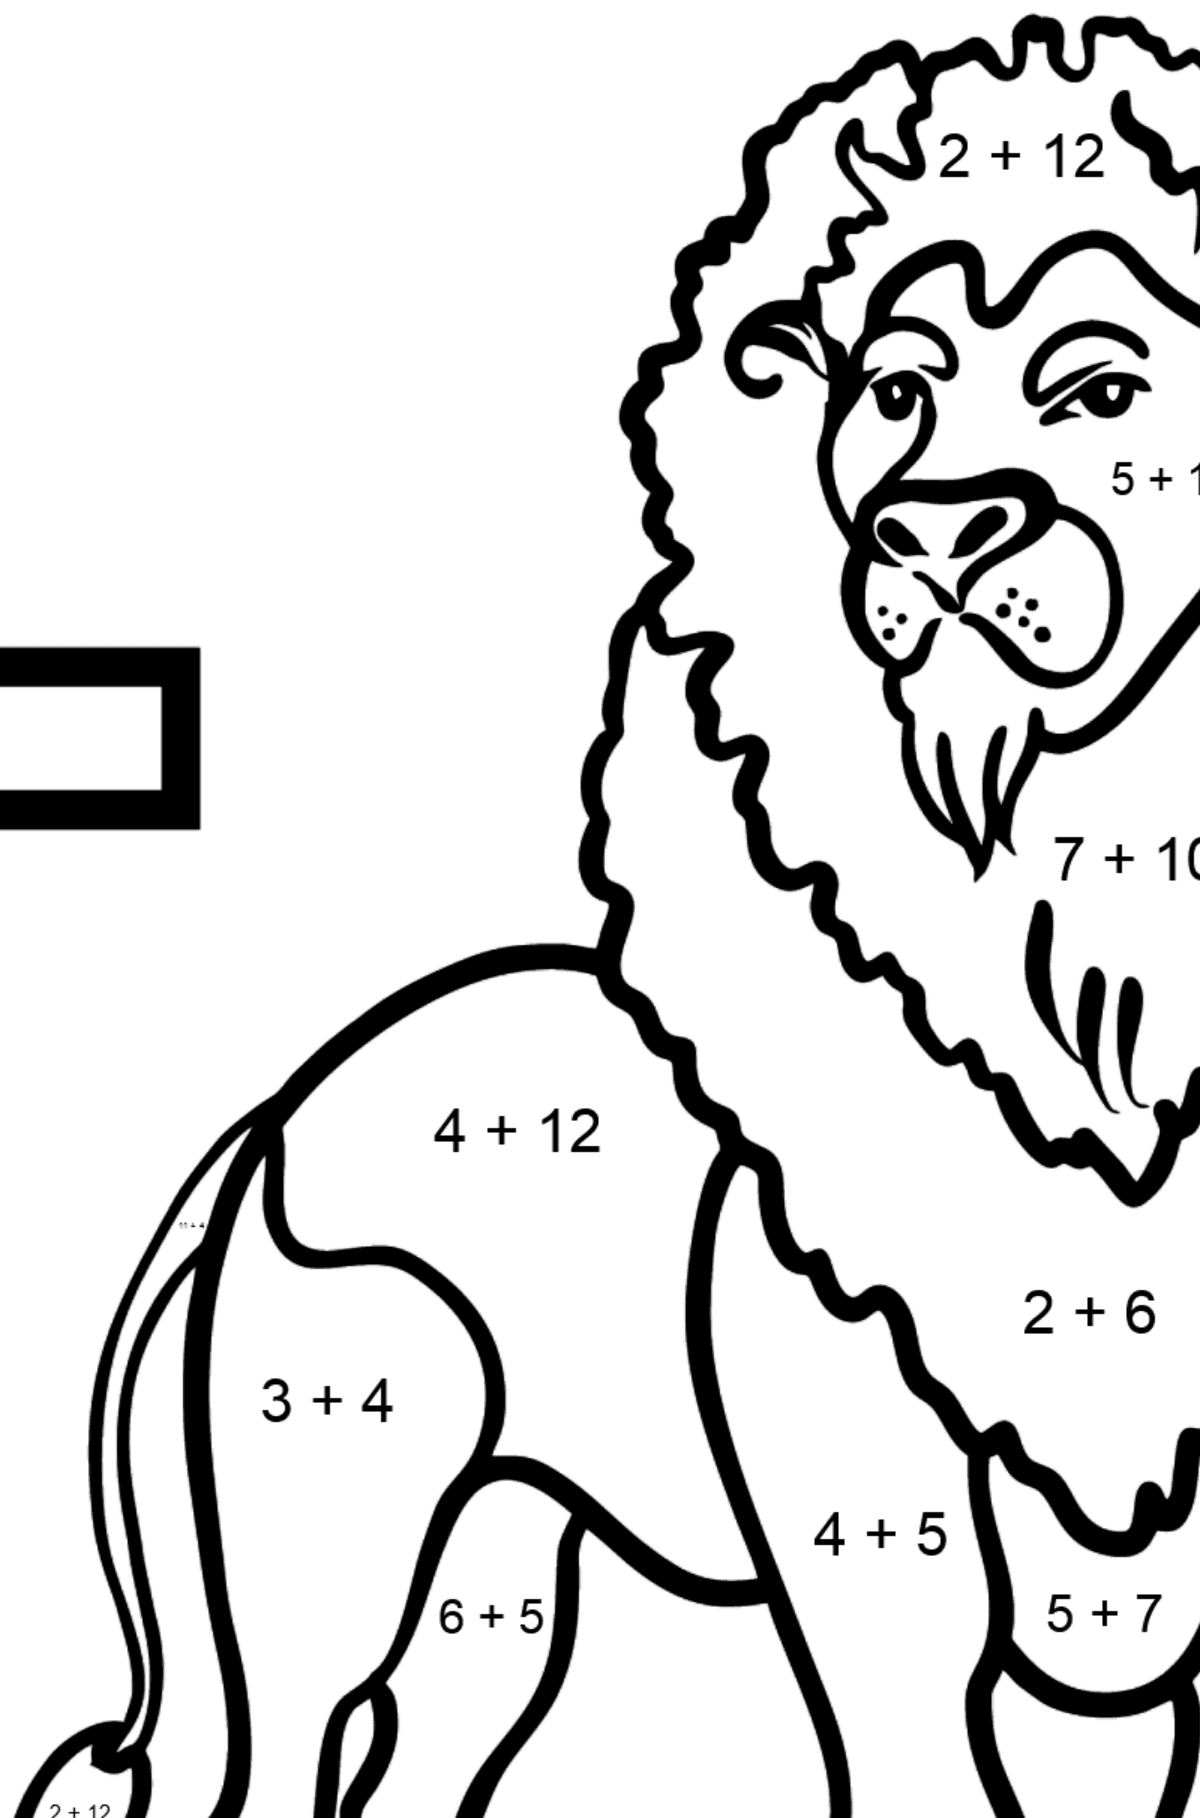 Spanish Letter L coloring pages - LEON - Math Coloring - Addition for Kids